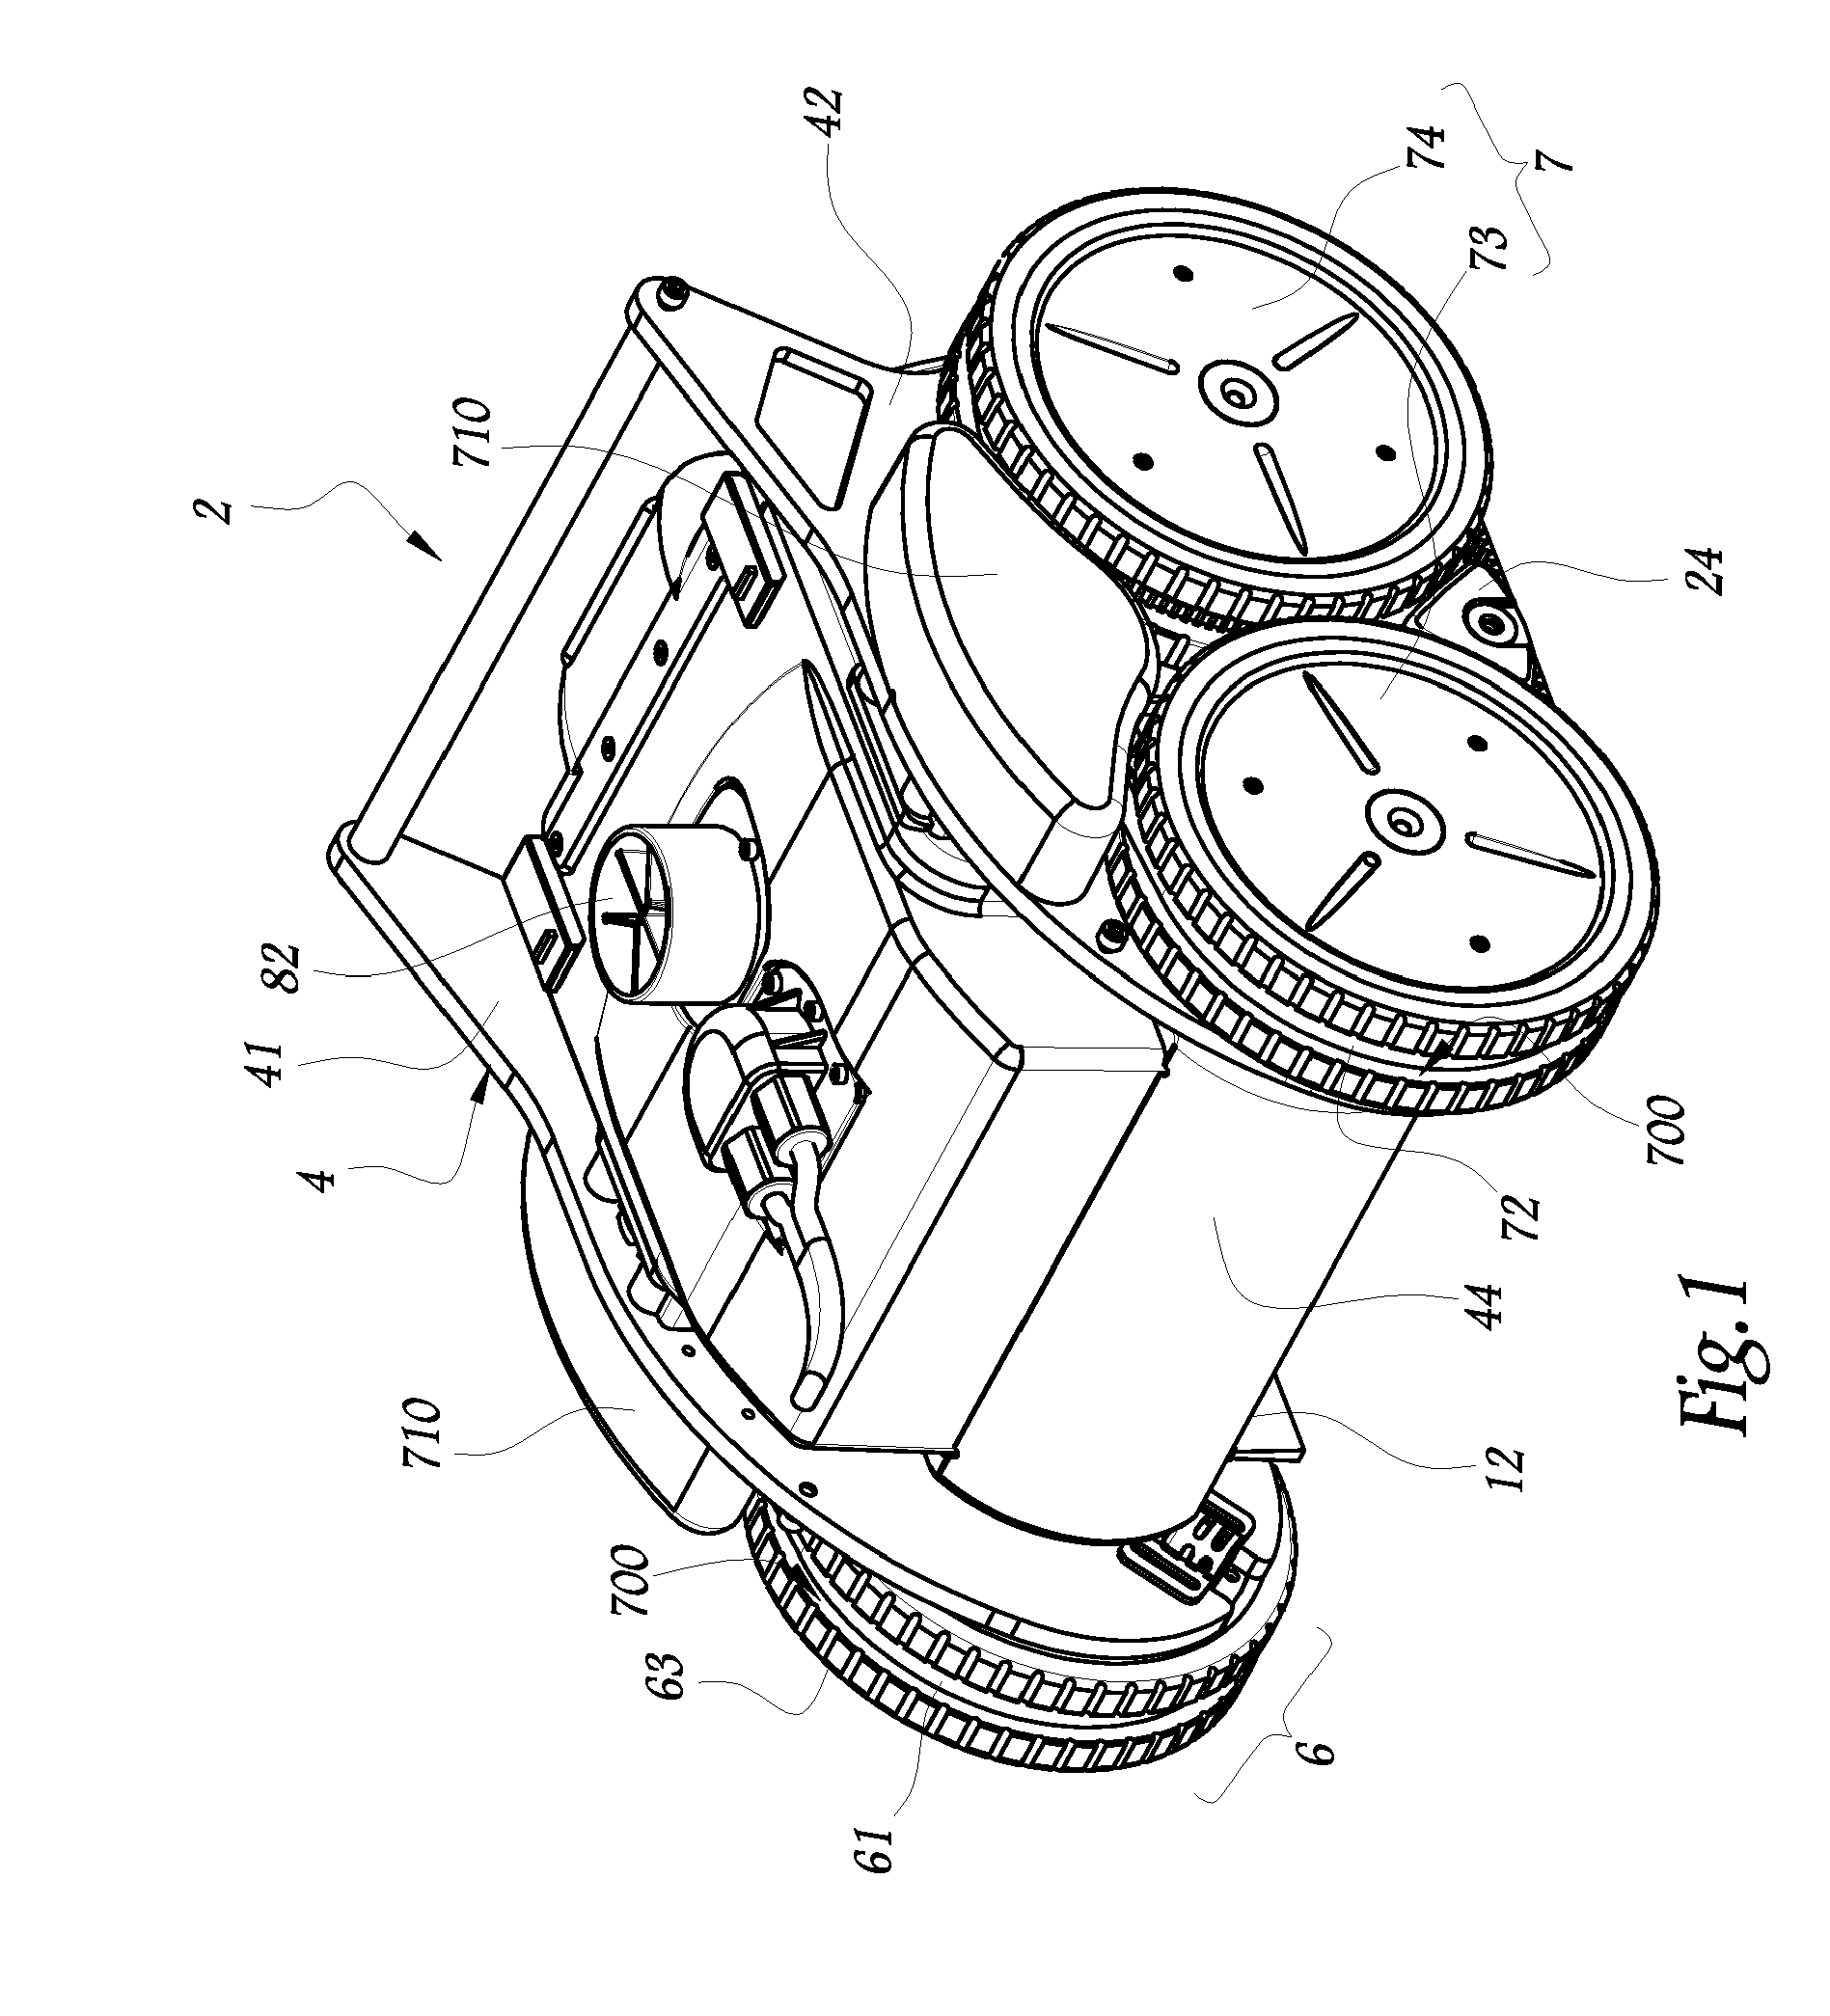 Underwater vehicle for cleaning submerged surfaces